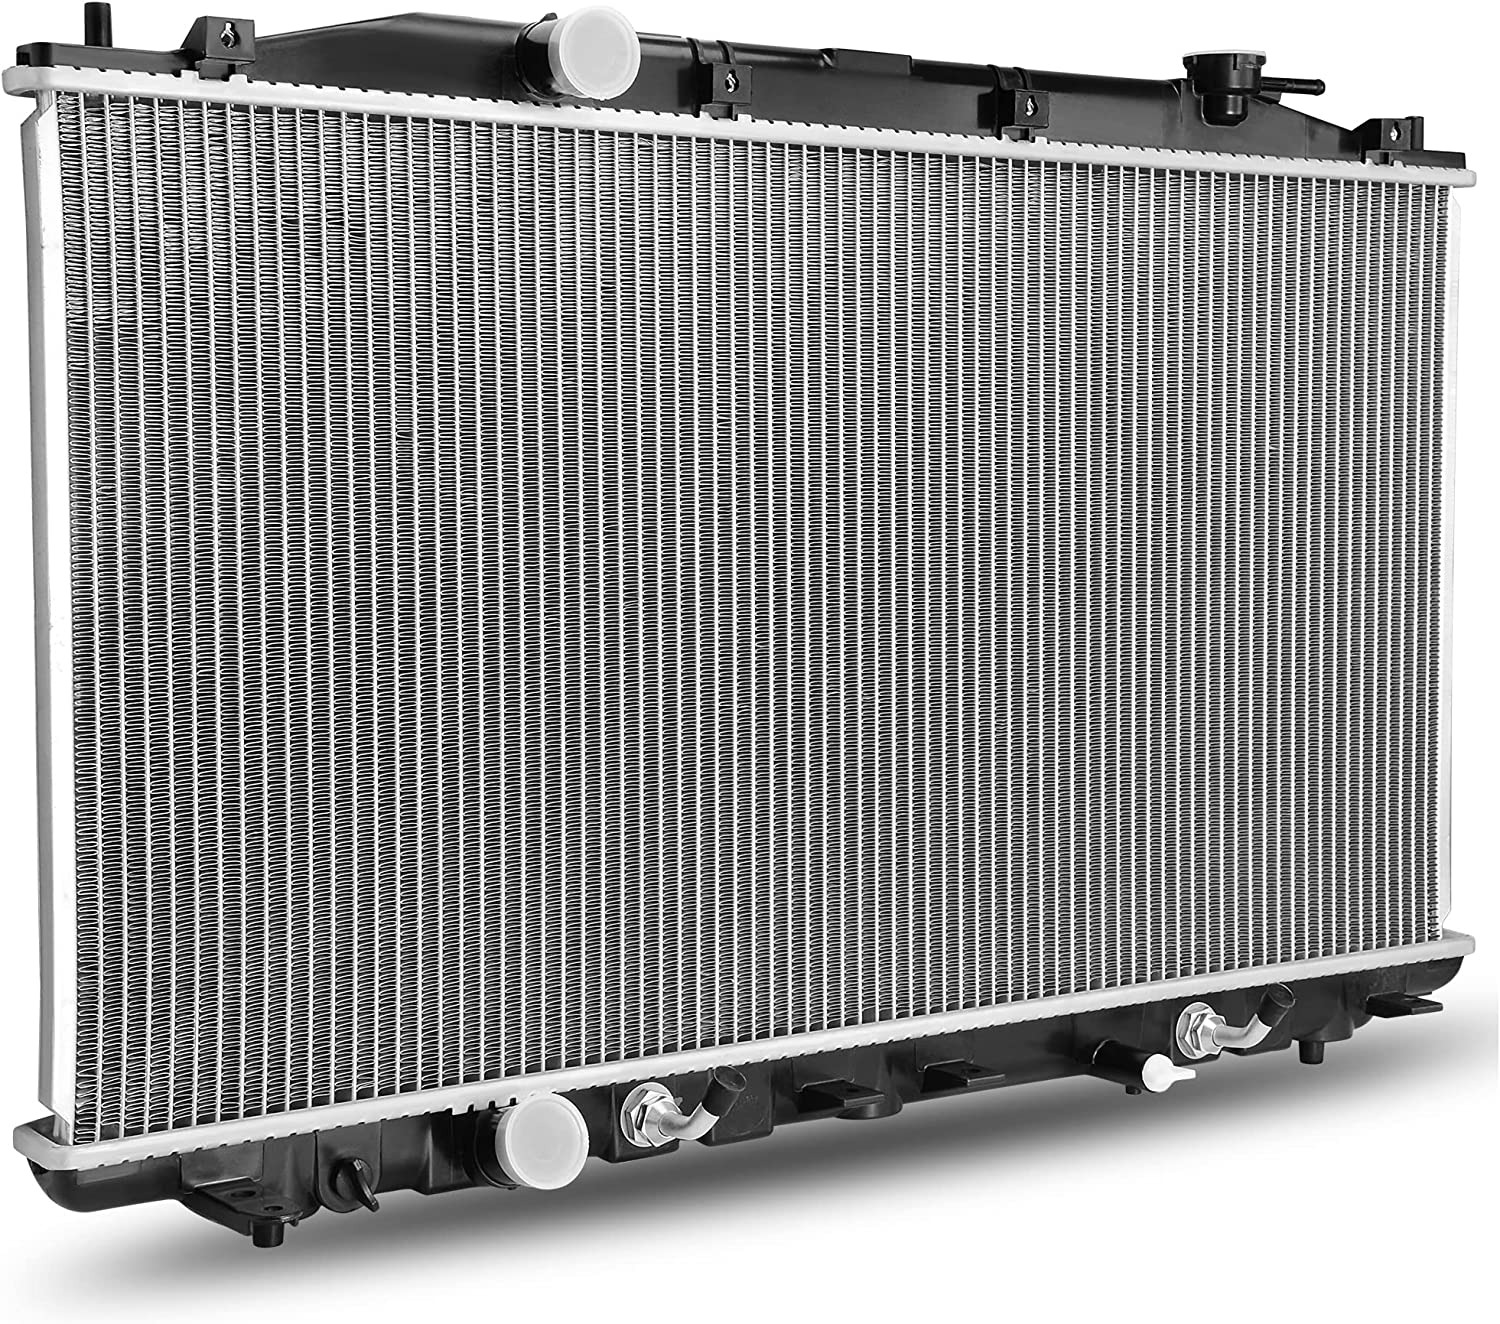 Radiator Complete Radiator Compatible with 2008-2012 Accord 2012-2015 Crosstour 